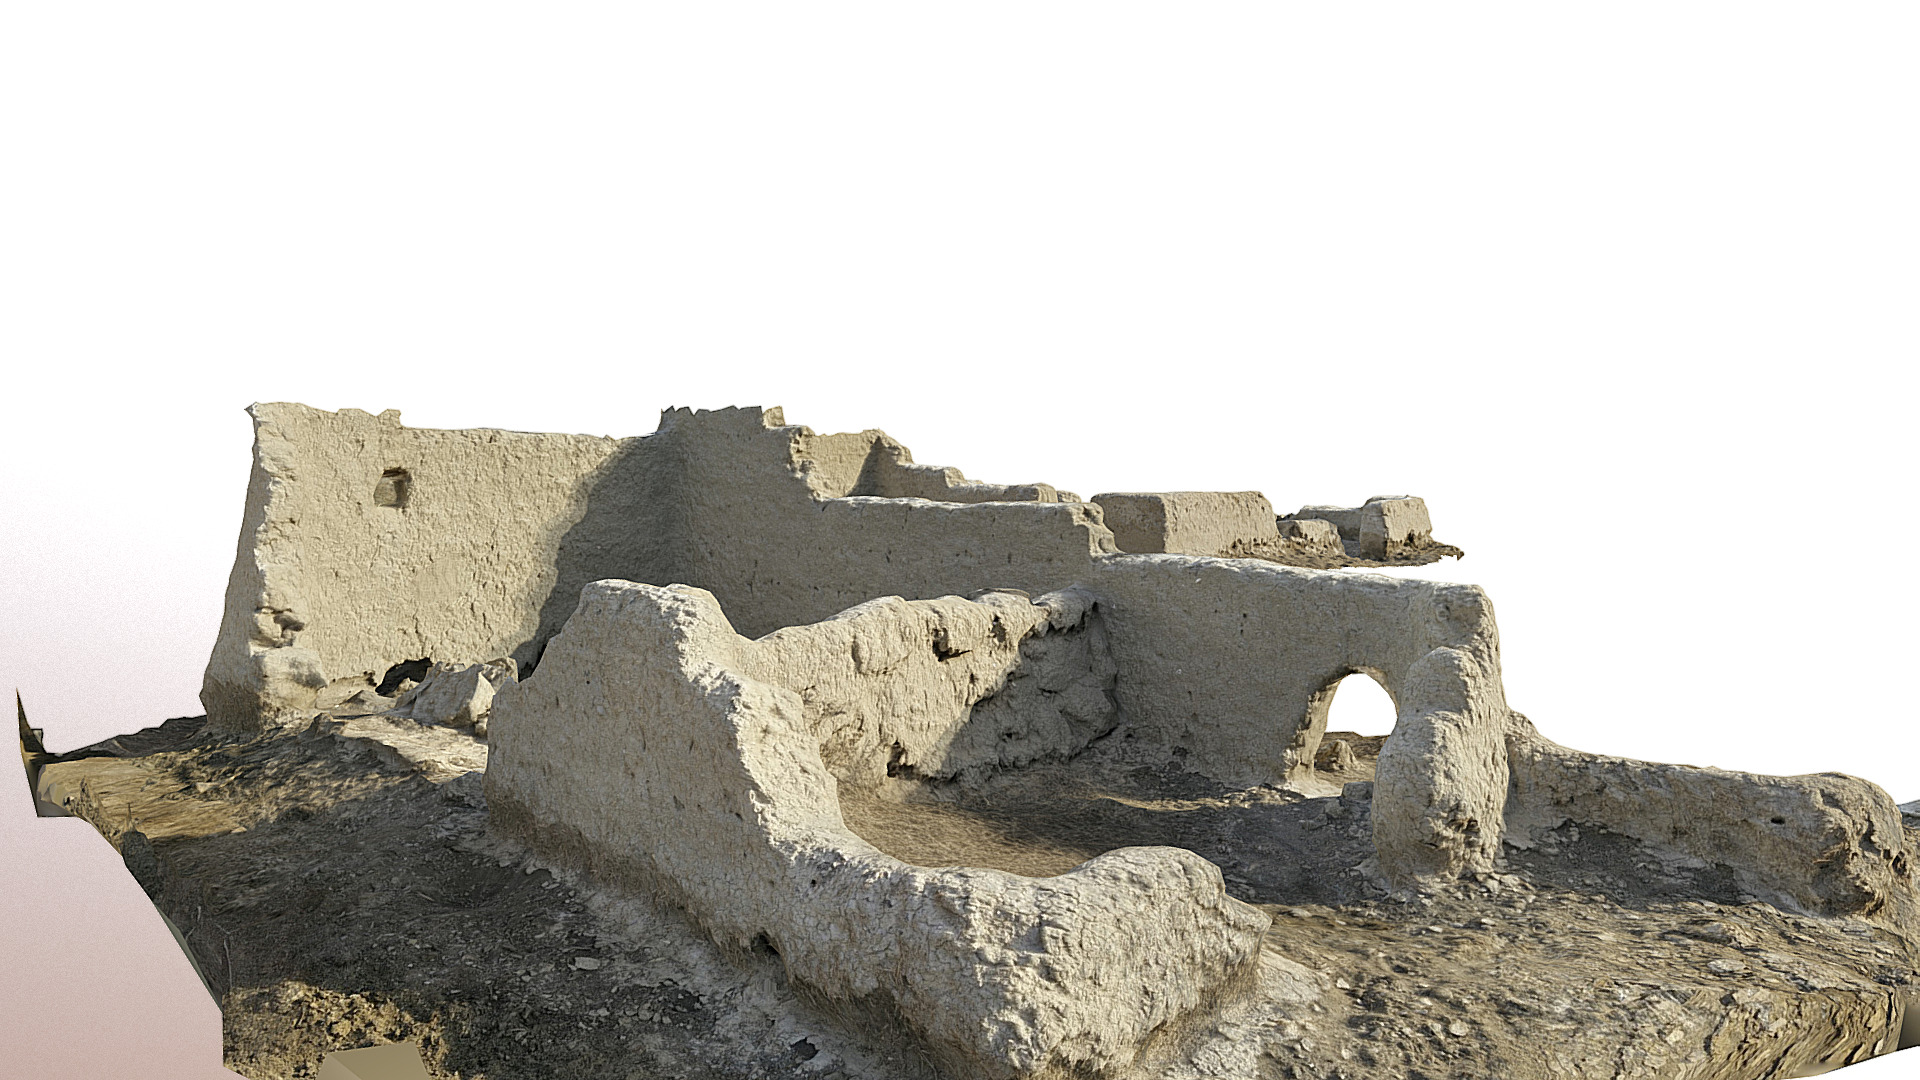 3D model Abandoned house, Tell Surghul (Iraq) - This is a 3D model of the Abandoned house, Tell Surghul (Iraq). The 3D model is about a stone building on a rocky hill.